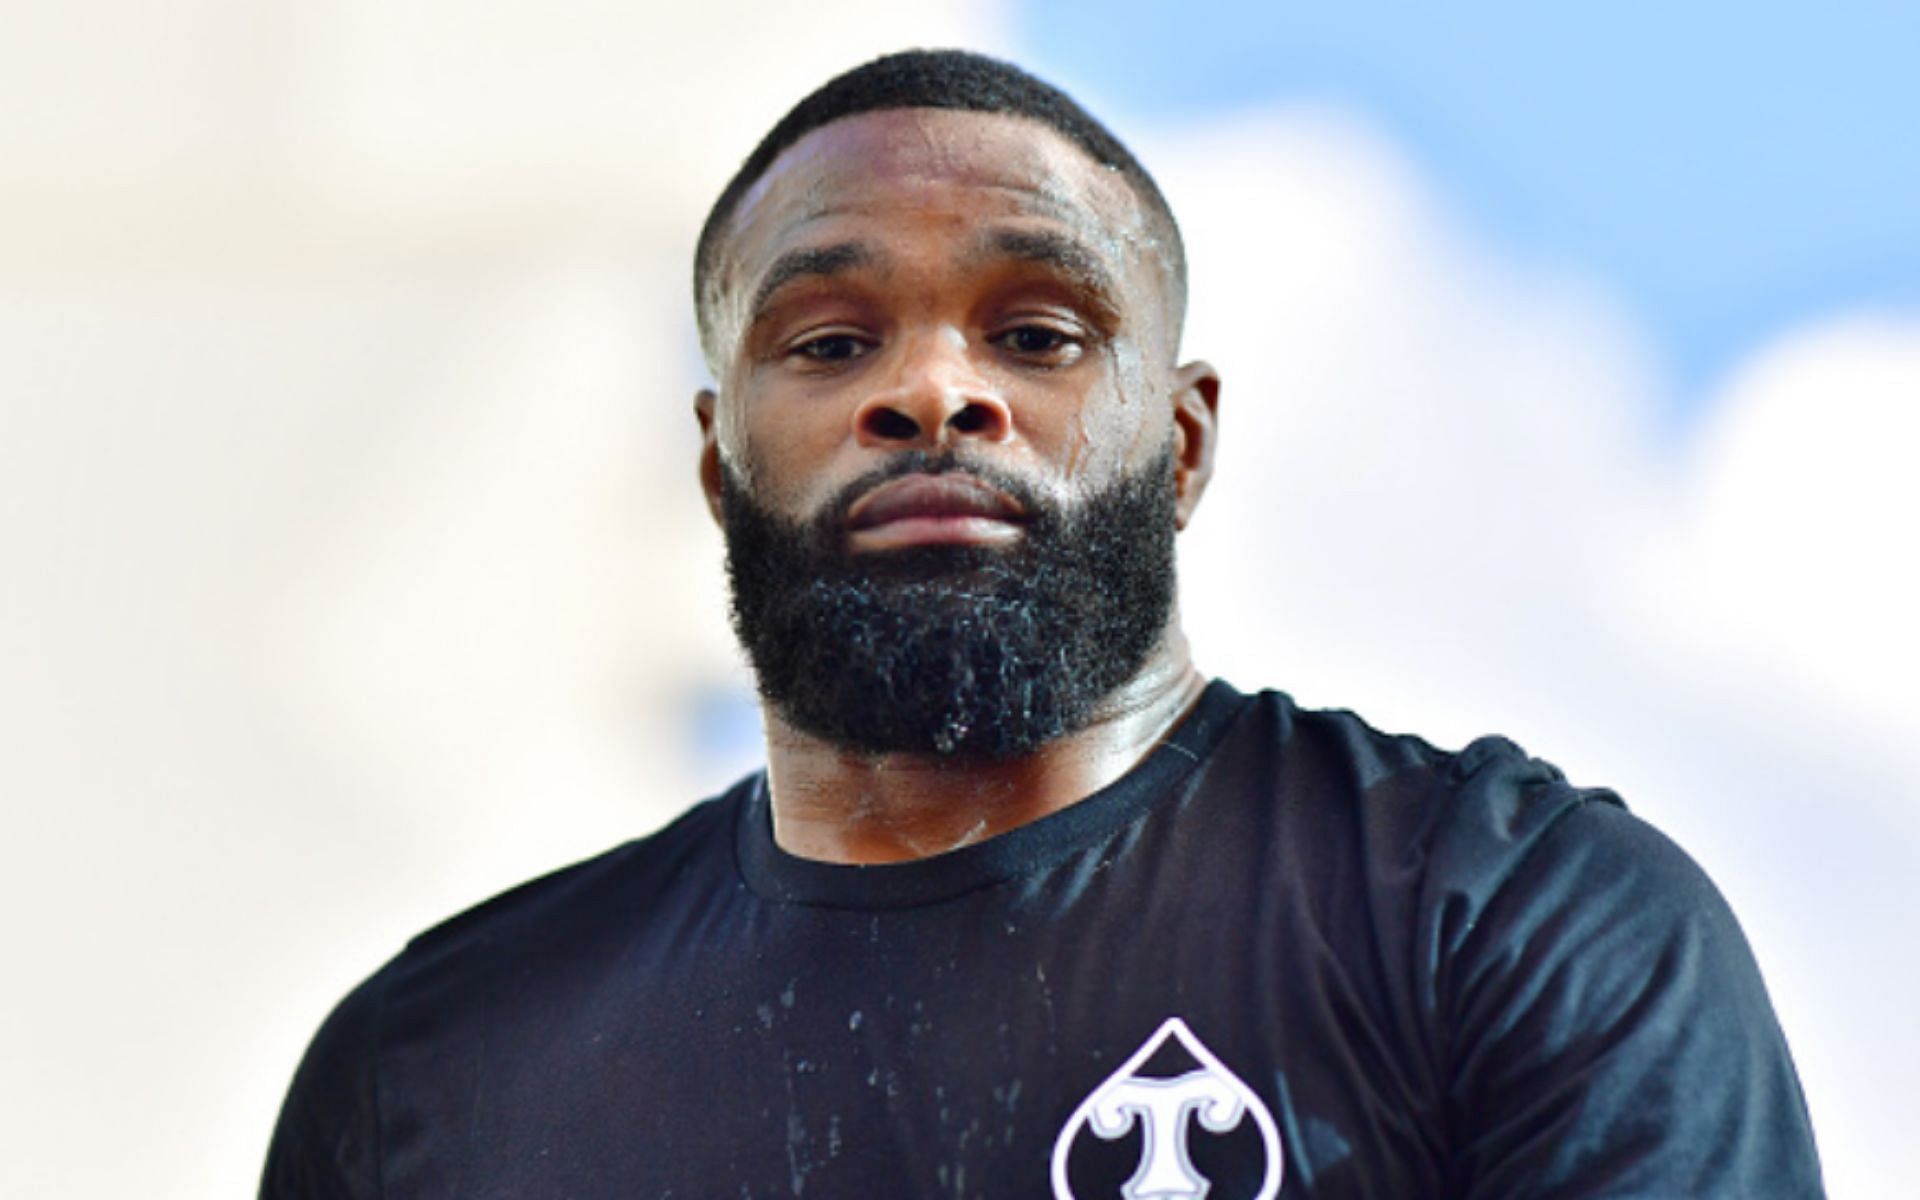 Former UFC welterweight champion Tyron Woodley